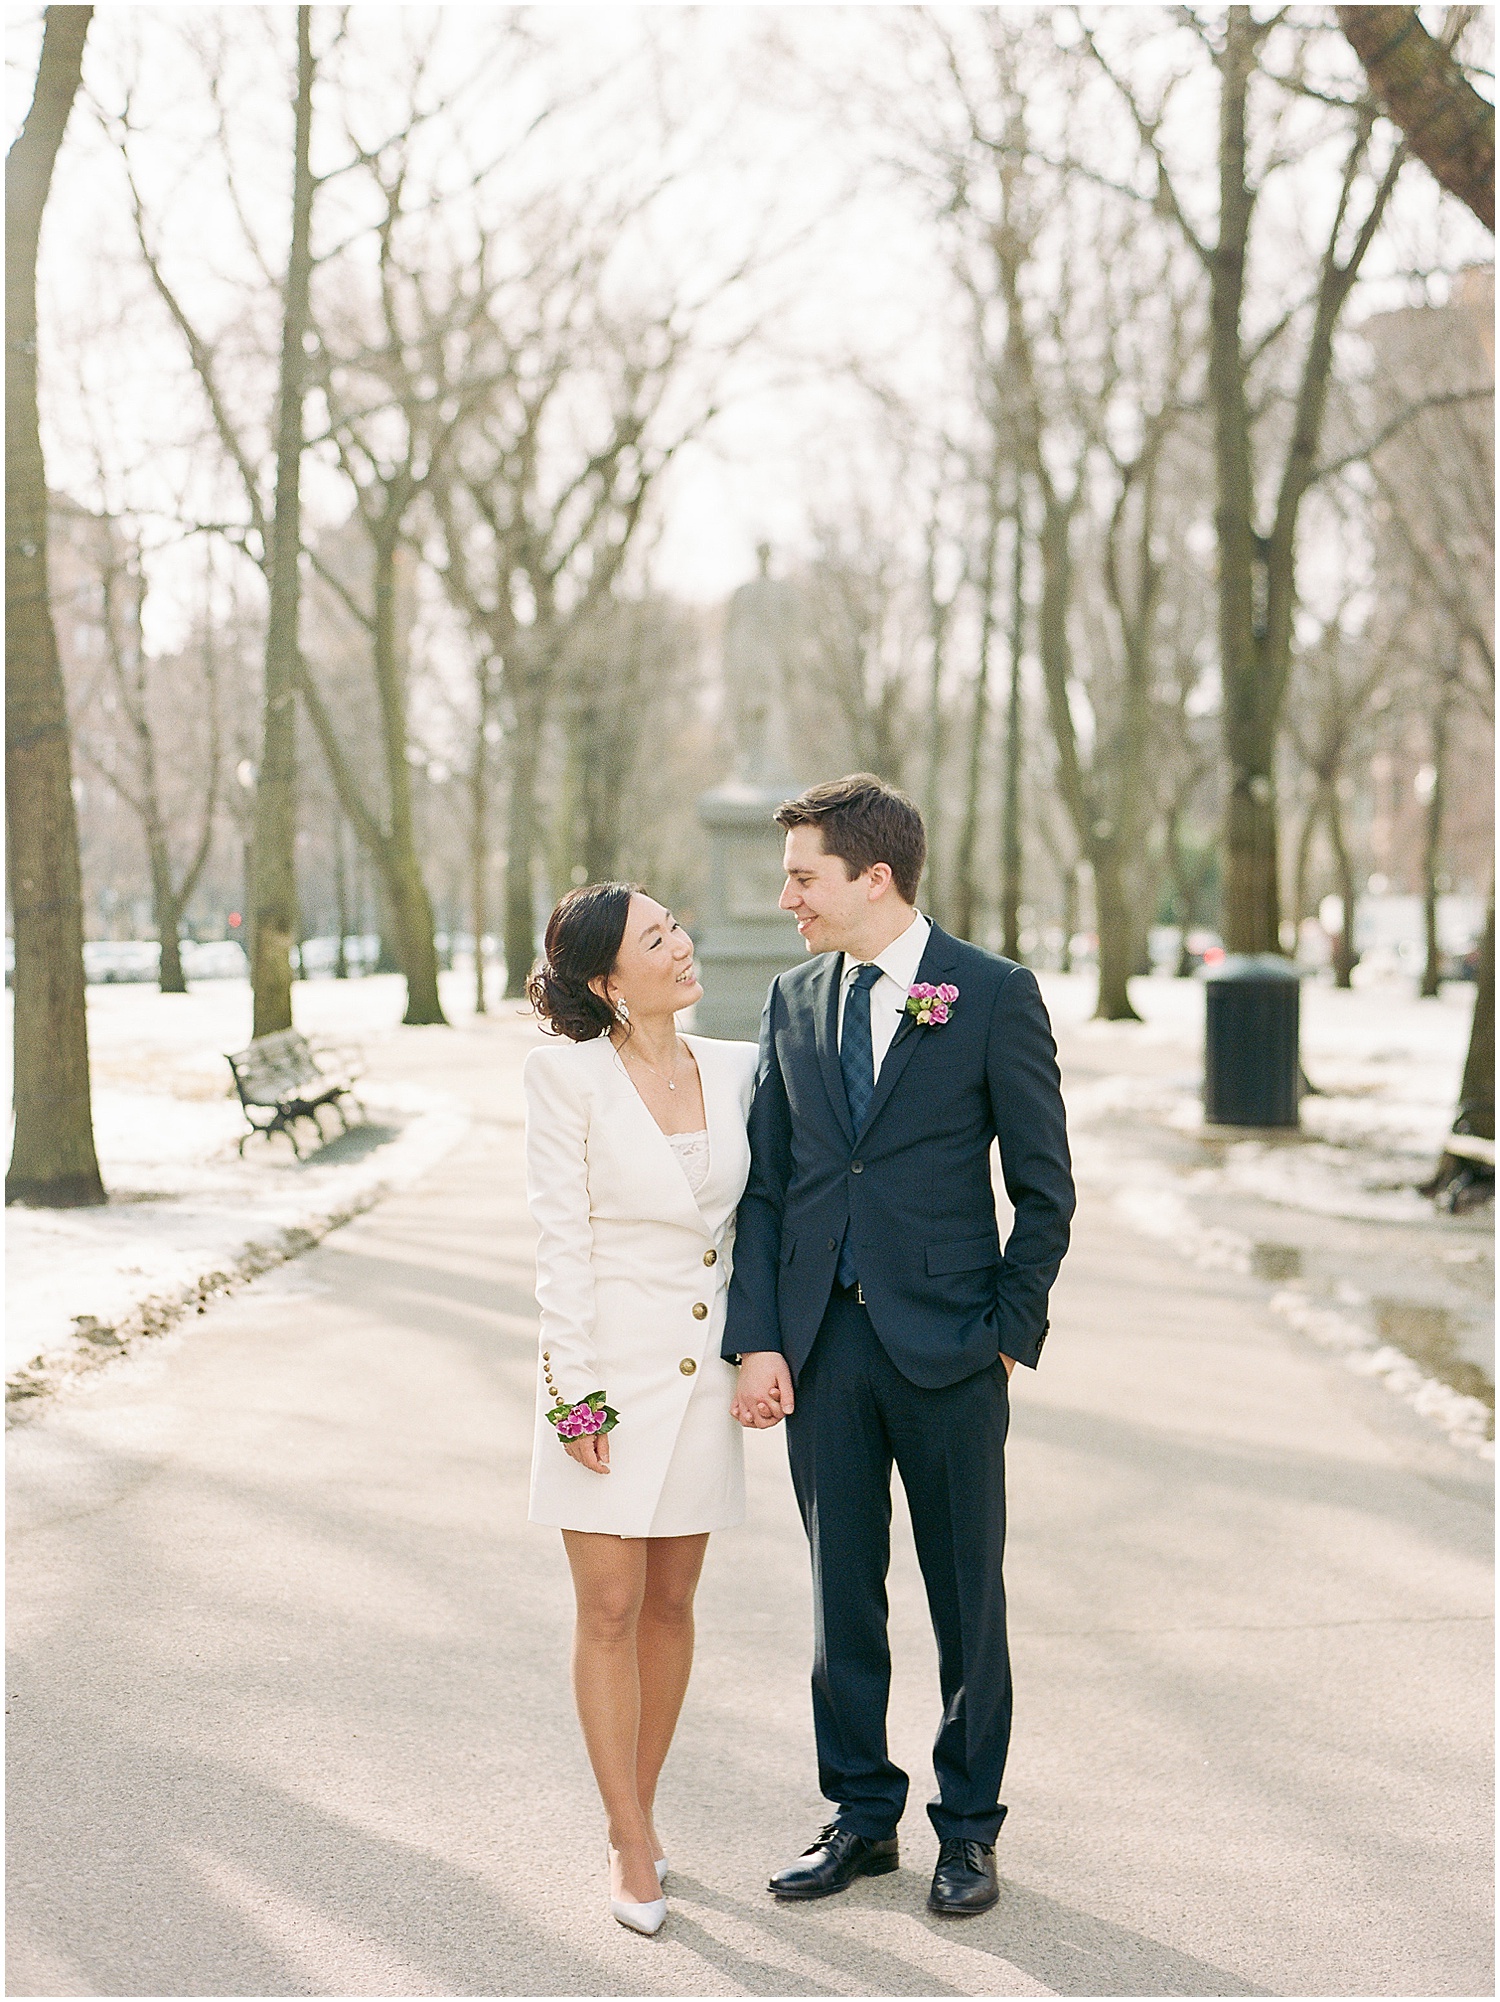 Winter elopement photos on Comm Ave